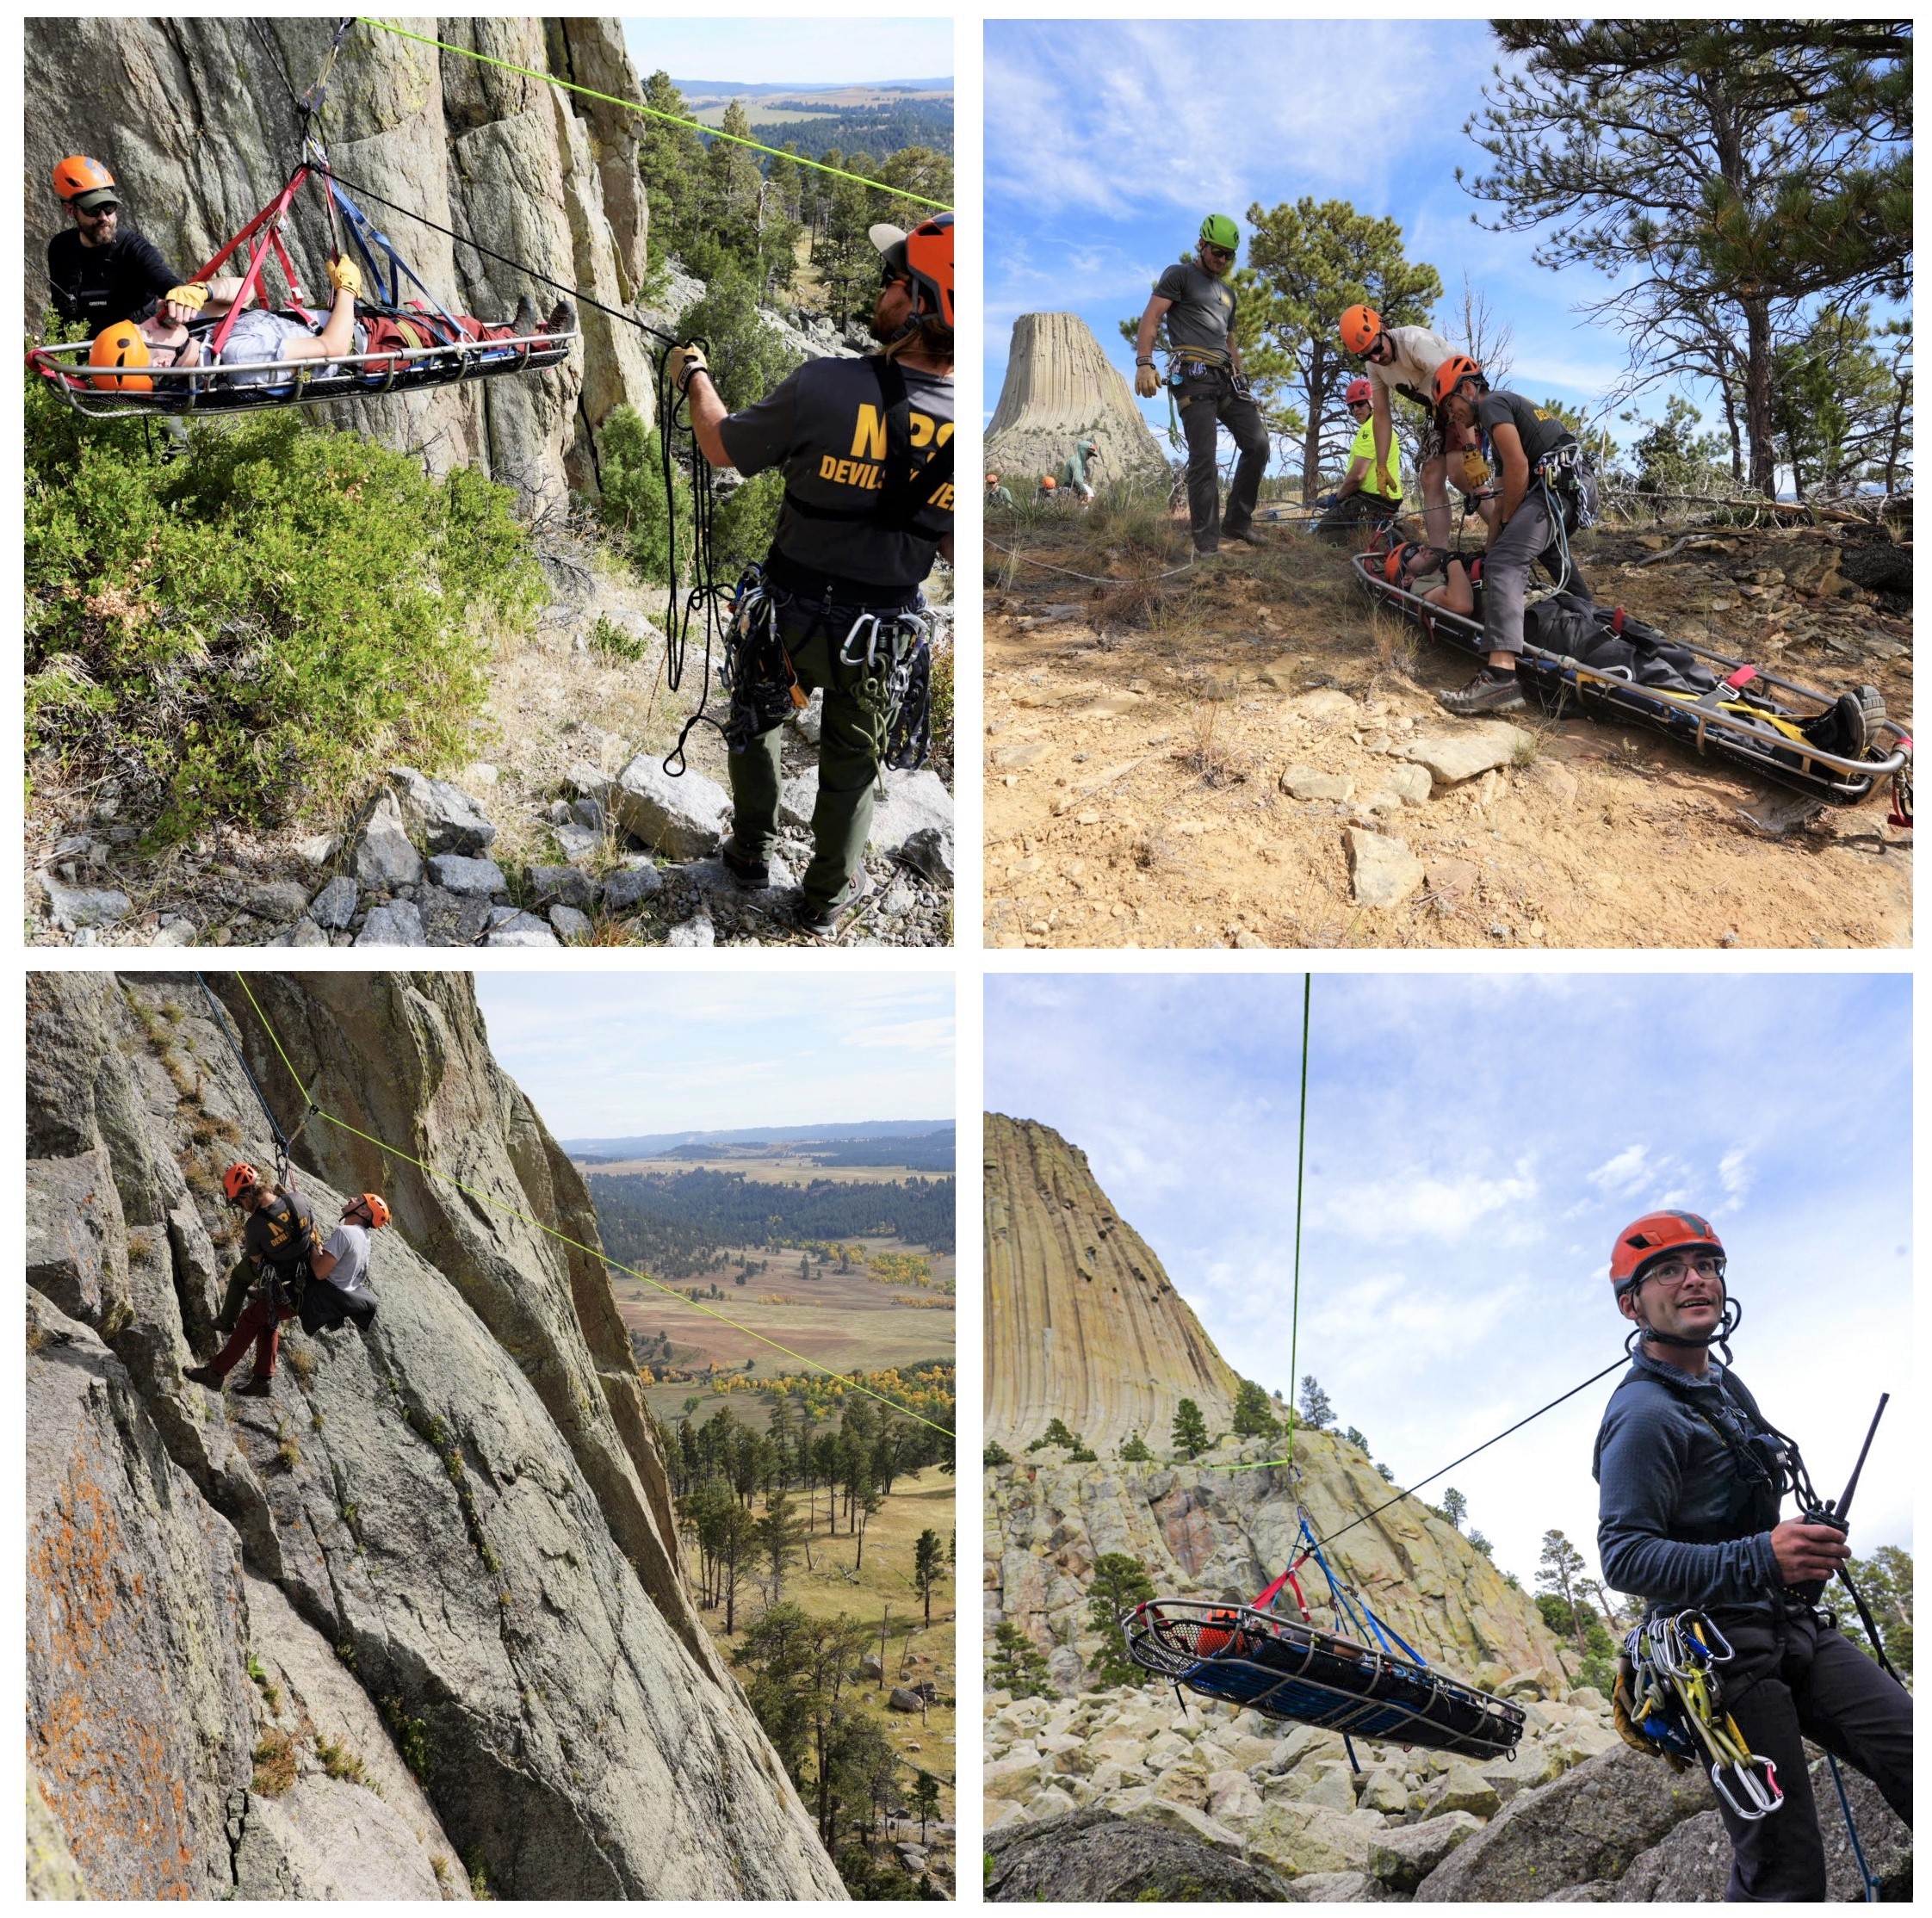 Devils Tower National Monument Staff Attended a 2 Week Training